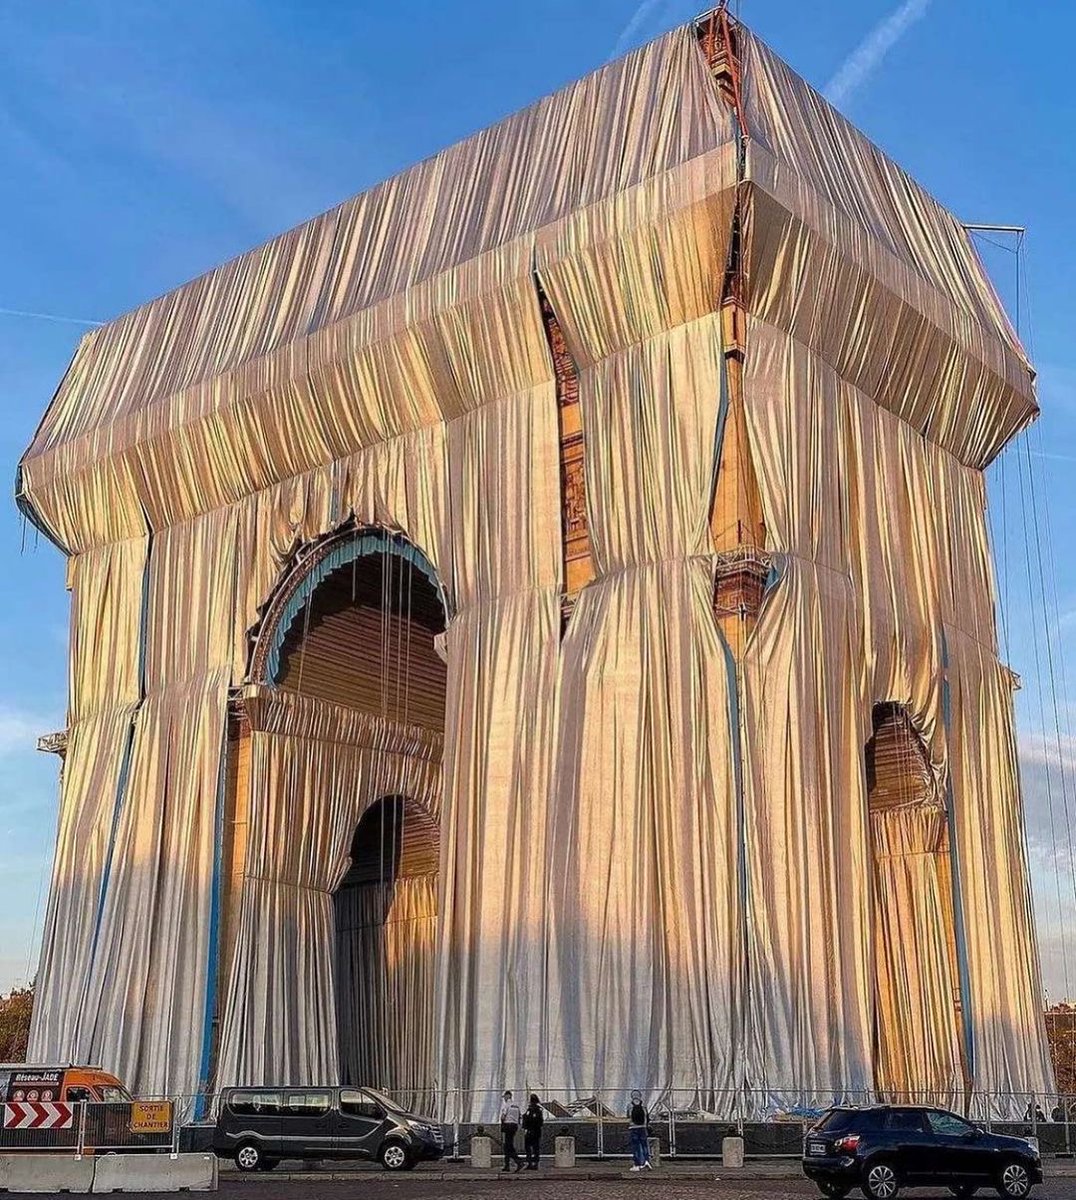 No matter how big or small, no matter the context or the story, art speaks out. “L’Arc de Triomphe, Wrapped,” a tribute to Christo and Jeanne-Claude.

#commontime #artworld #arcdetriomphe #artspeaks #artstory #visualartwork #wrapped #arthistorian #learnthroughart #anytimeanywhere